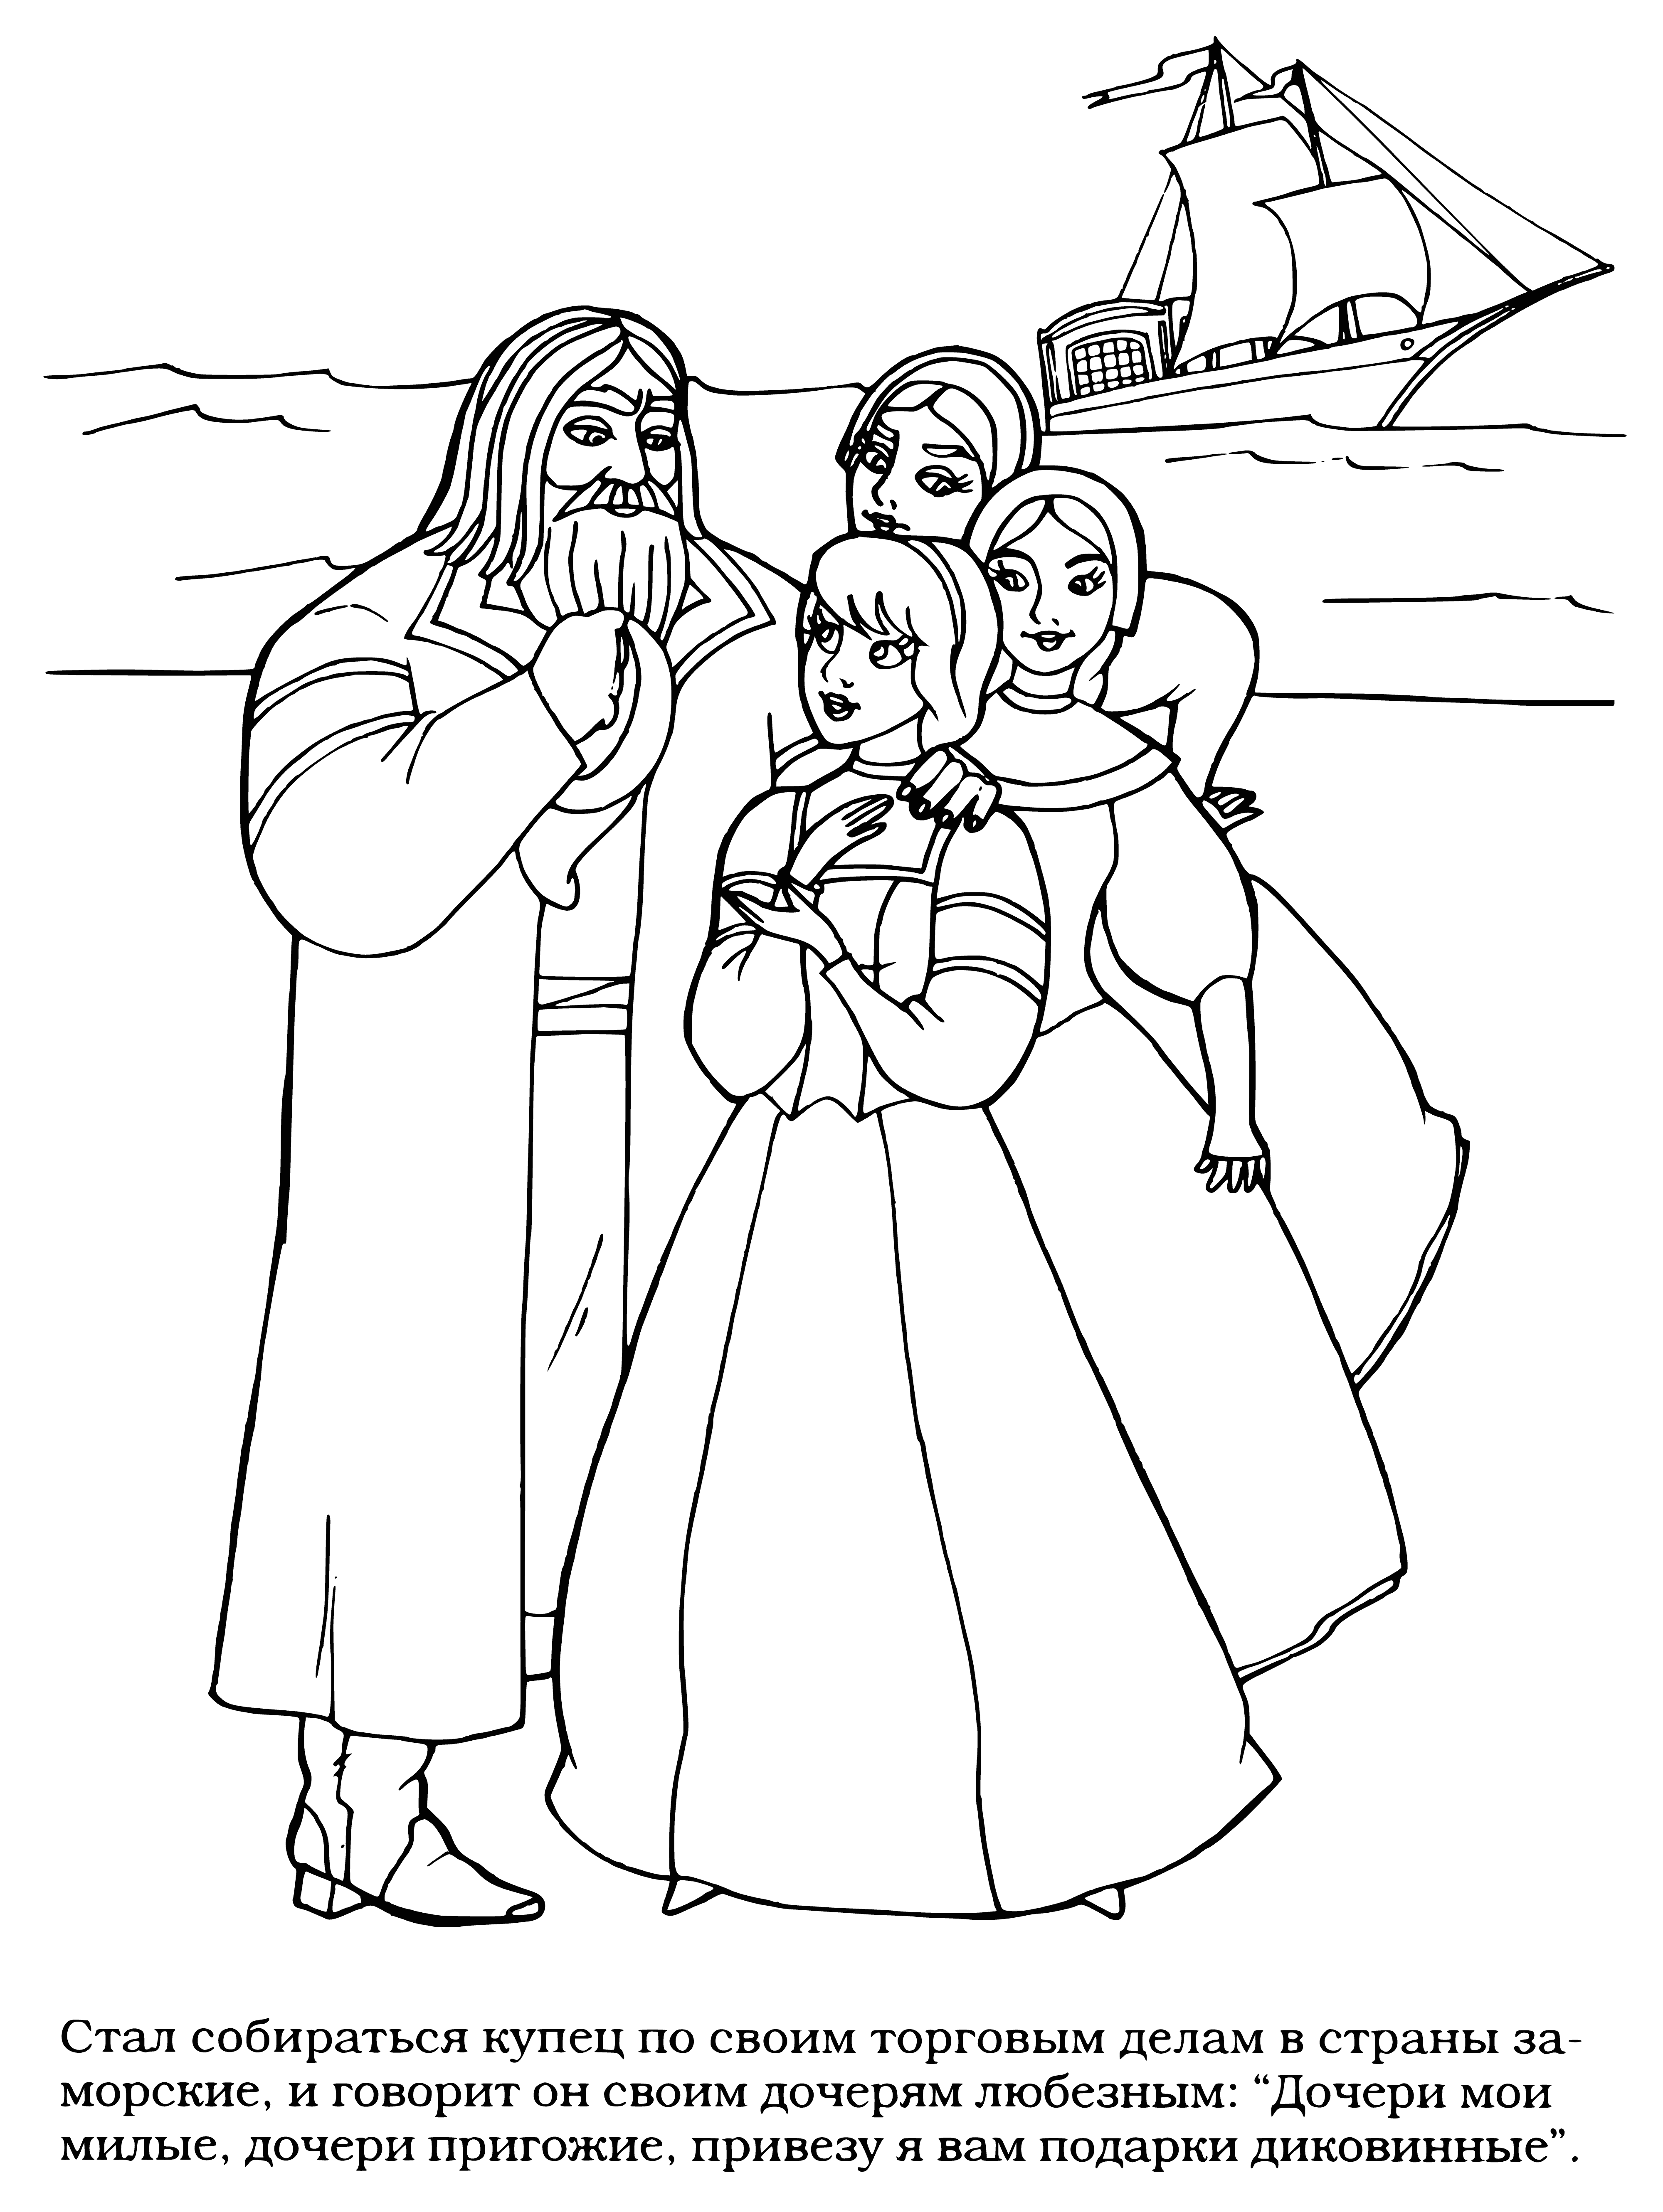 coloring page: 4 people in Merchant & daughters: merchant (middle-aged, beard, turban, bowl of fruit); 2 daughters (young, long/short hair, dress); 1 servant (holding jug of water).